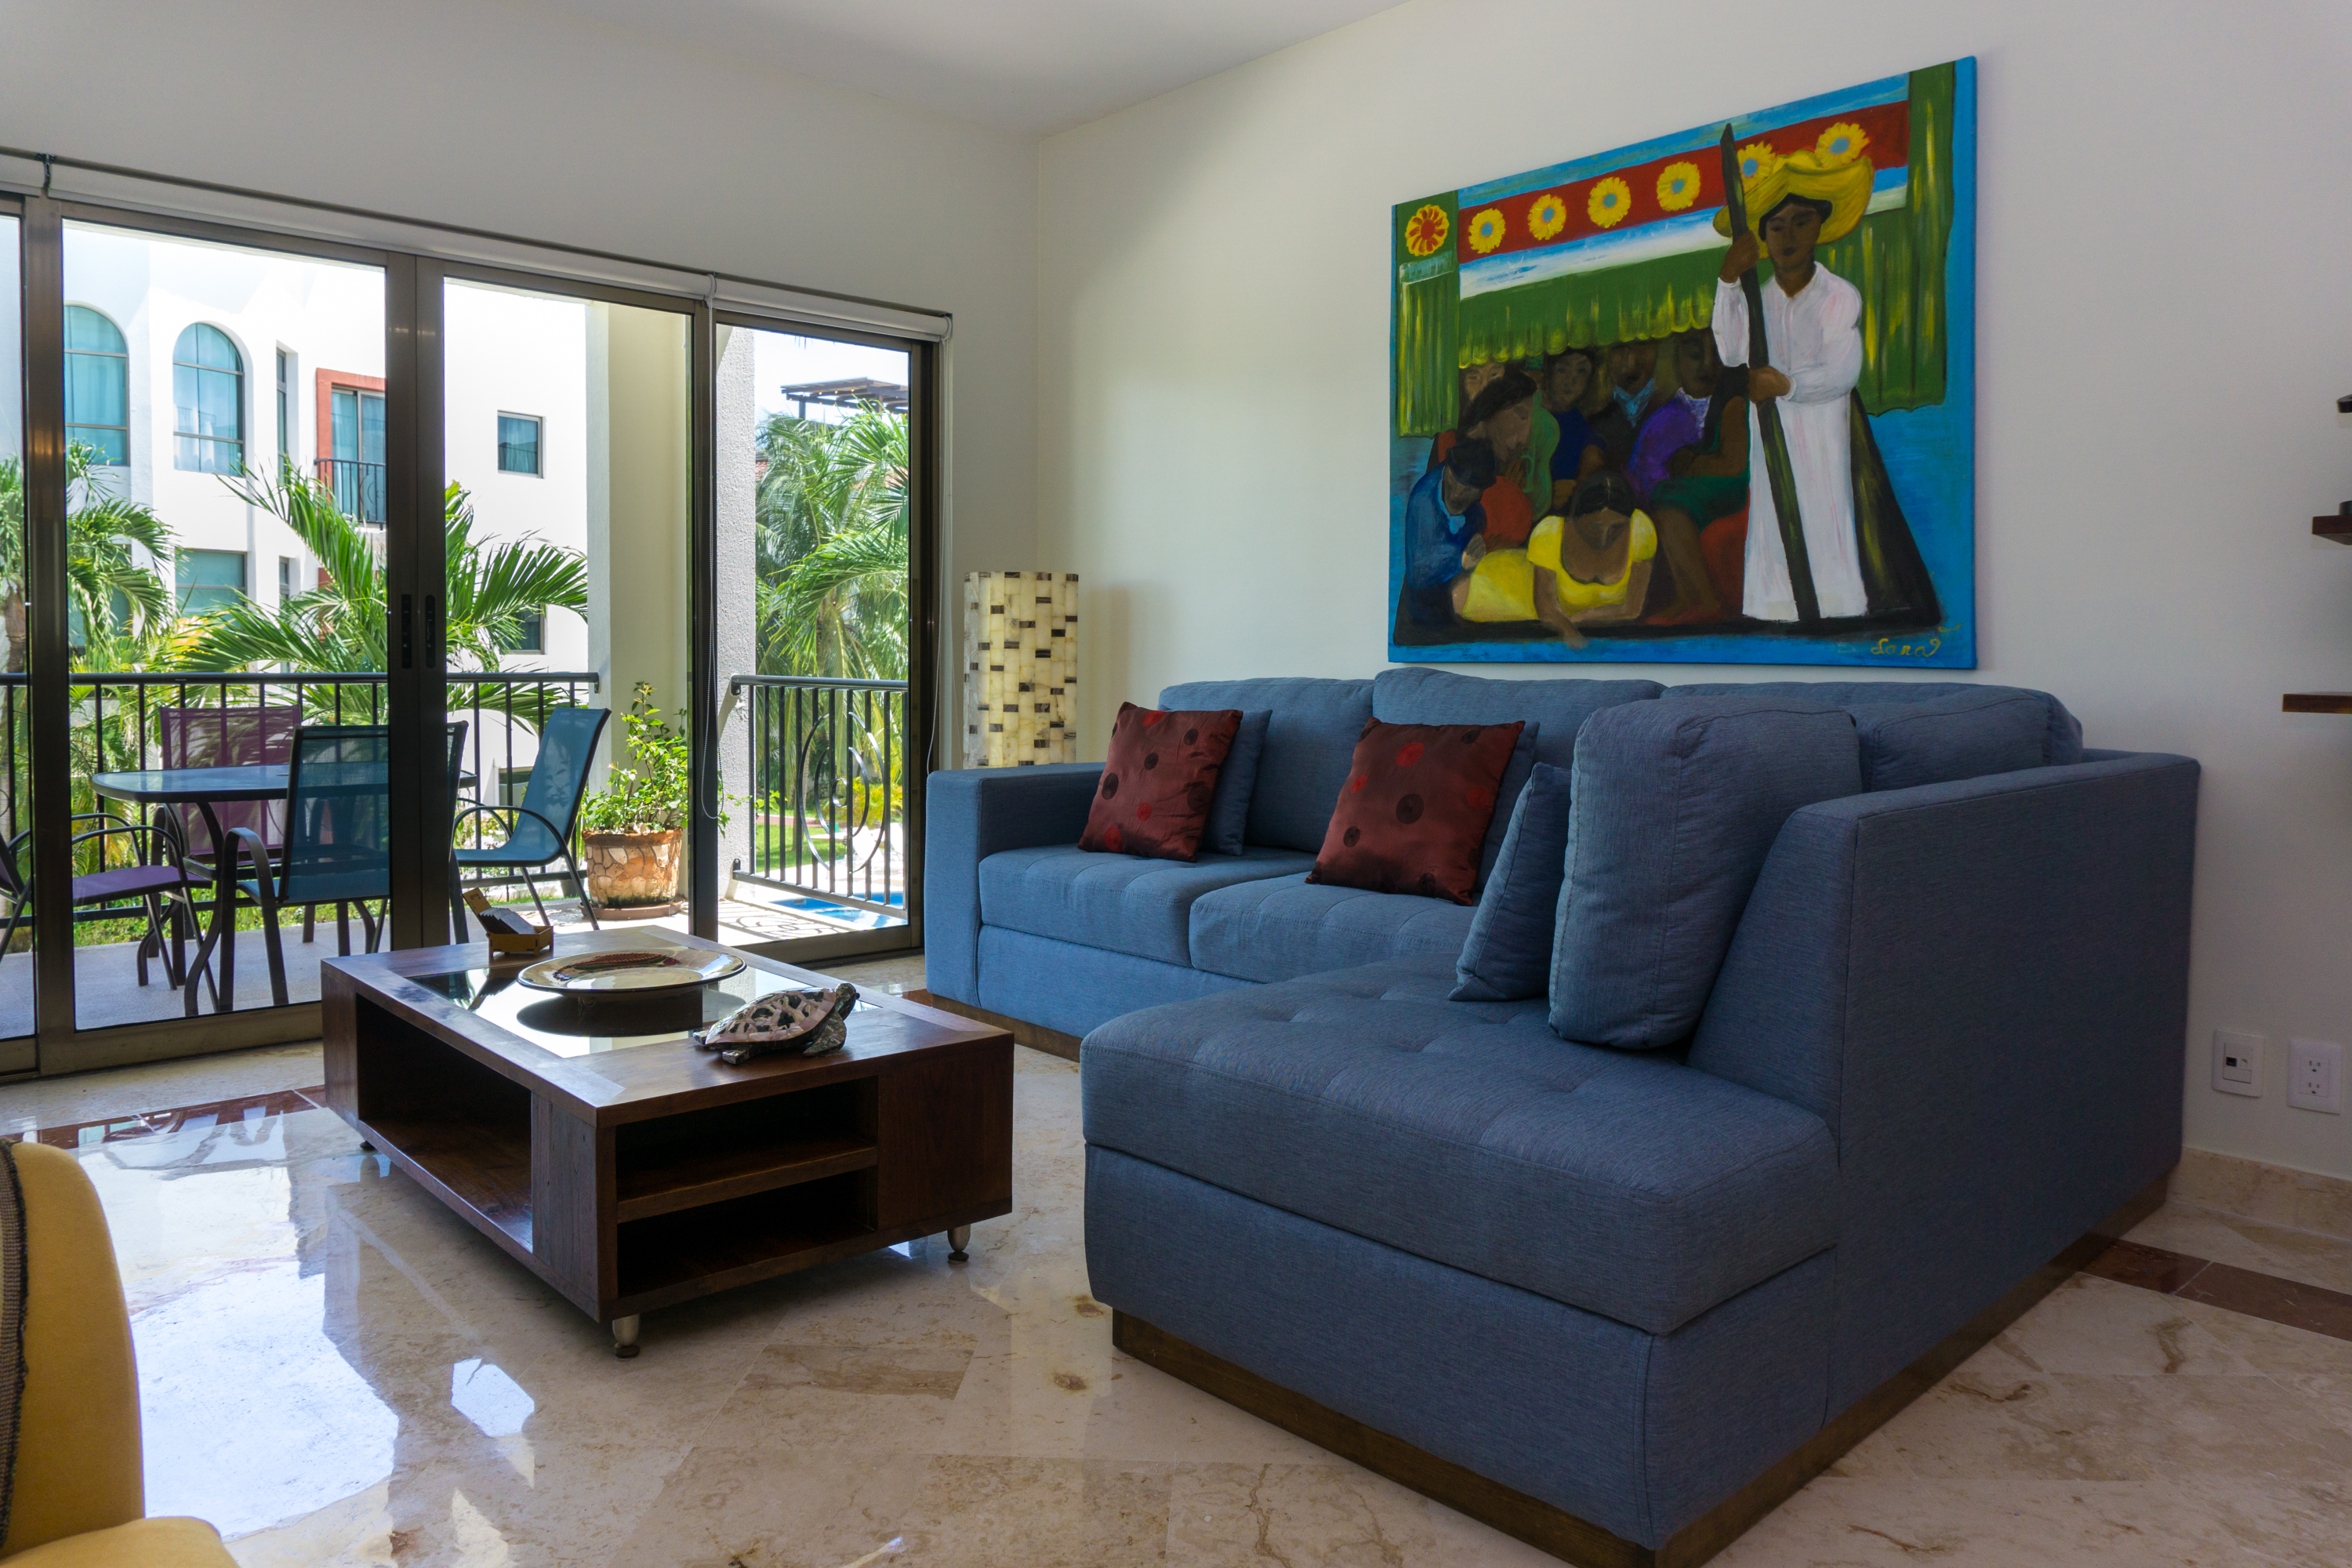 Second Floor Unit with views of the gardens and pool at Paseo del Sol by BRIC